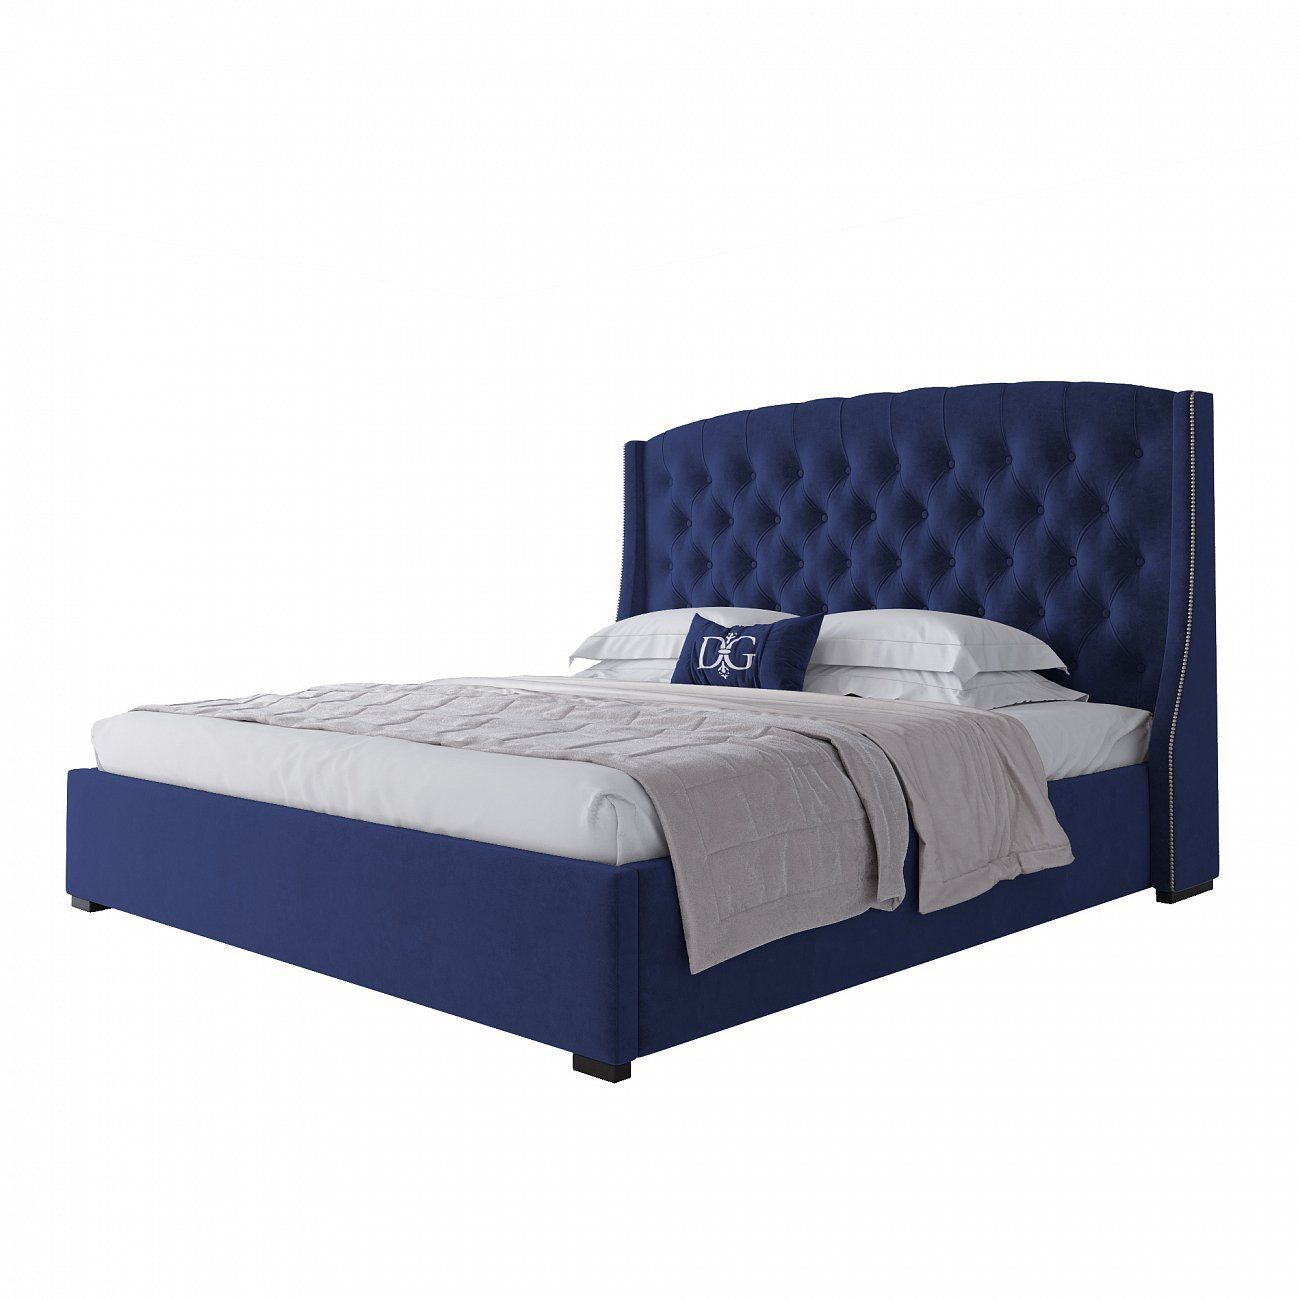 Double bed with upholstered headboard 180x200 cm blue Hugo